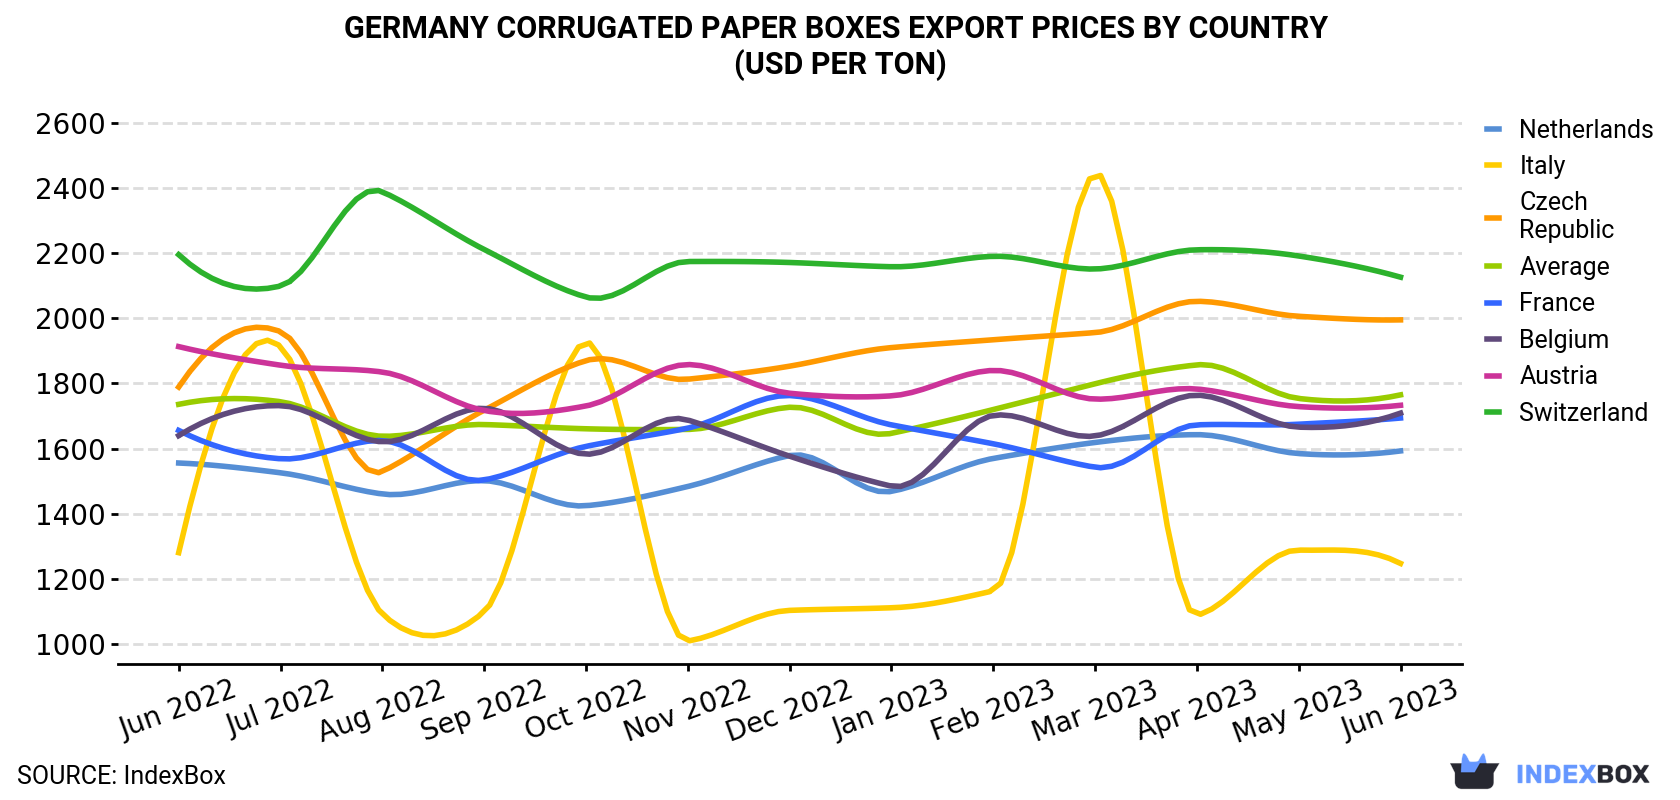 Germany Corrugated Paper Boxes Export Prices By Country (USD Per Ton)